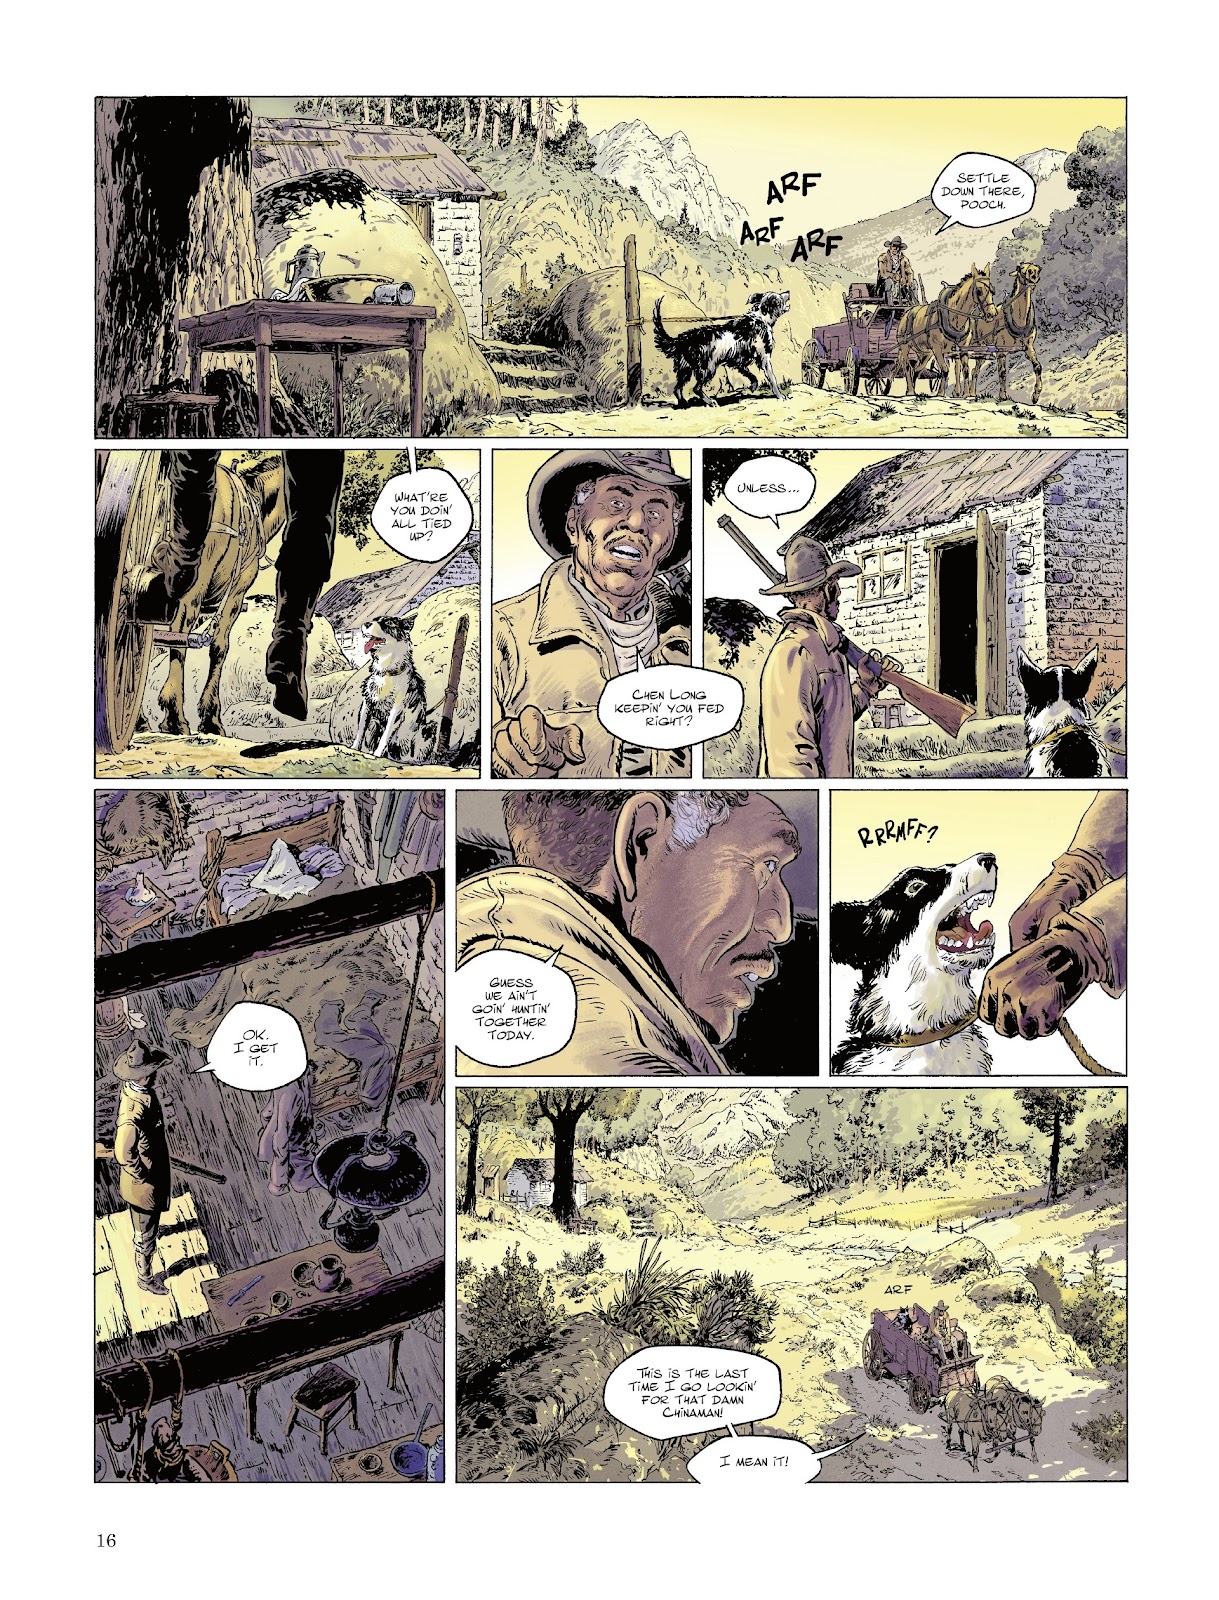 The Tiger Awakens: The Return of John Chinaman issue 1 - Page 17